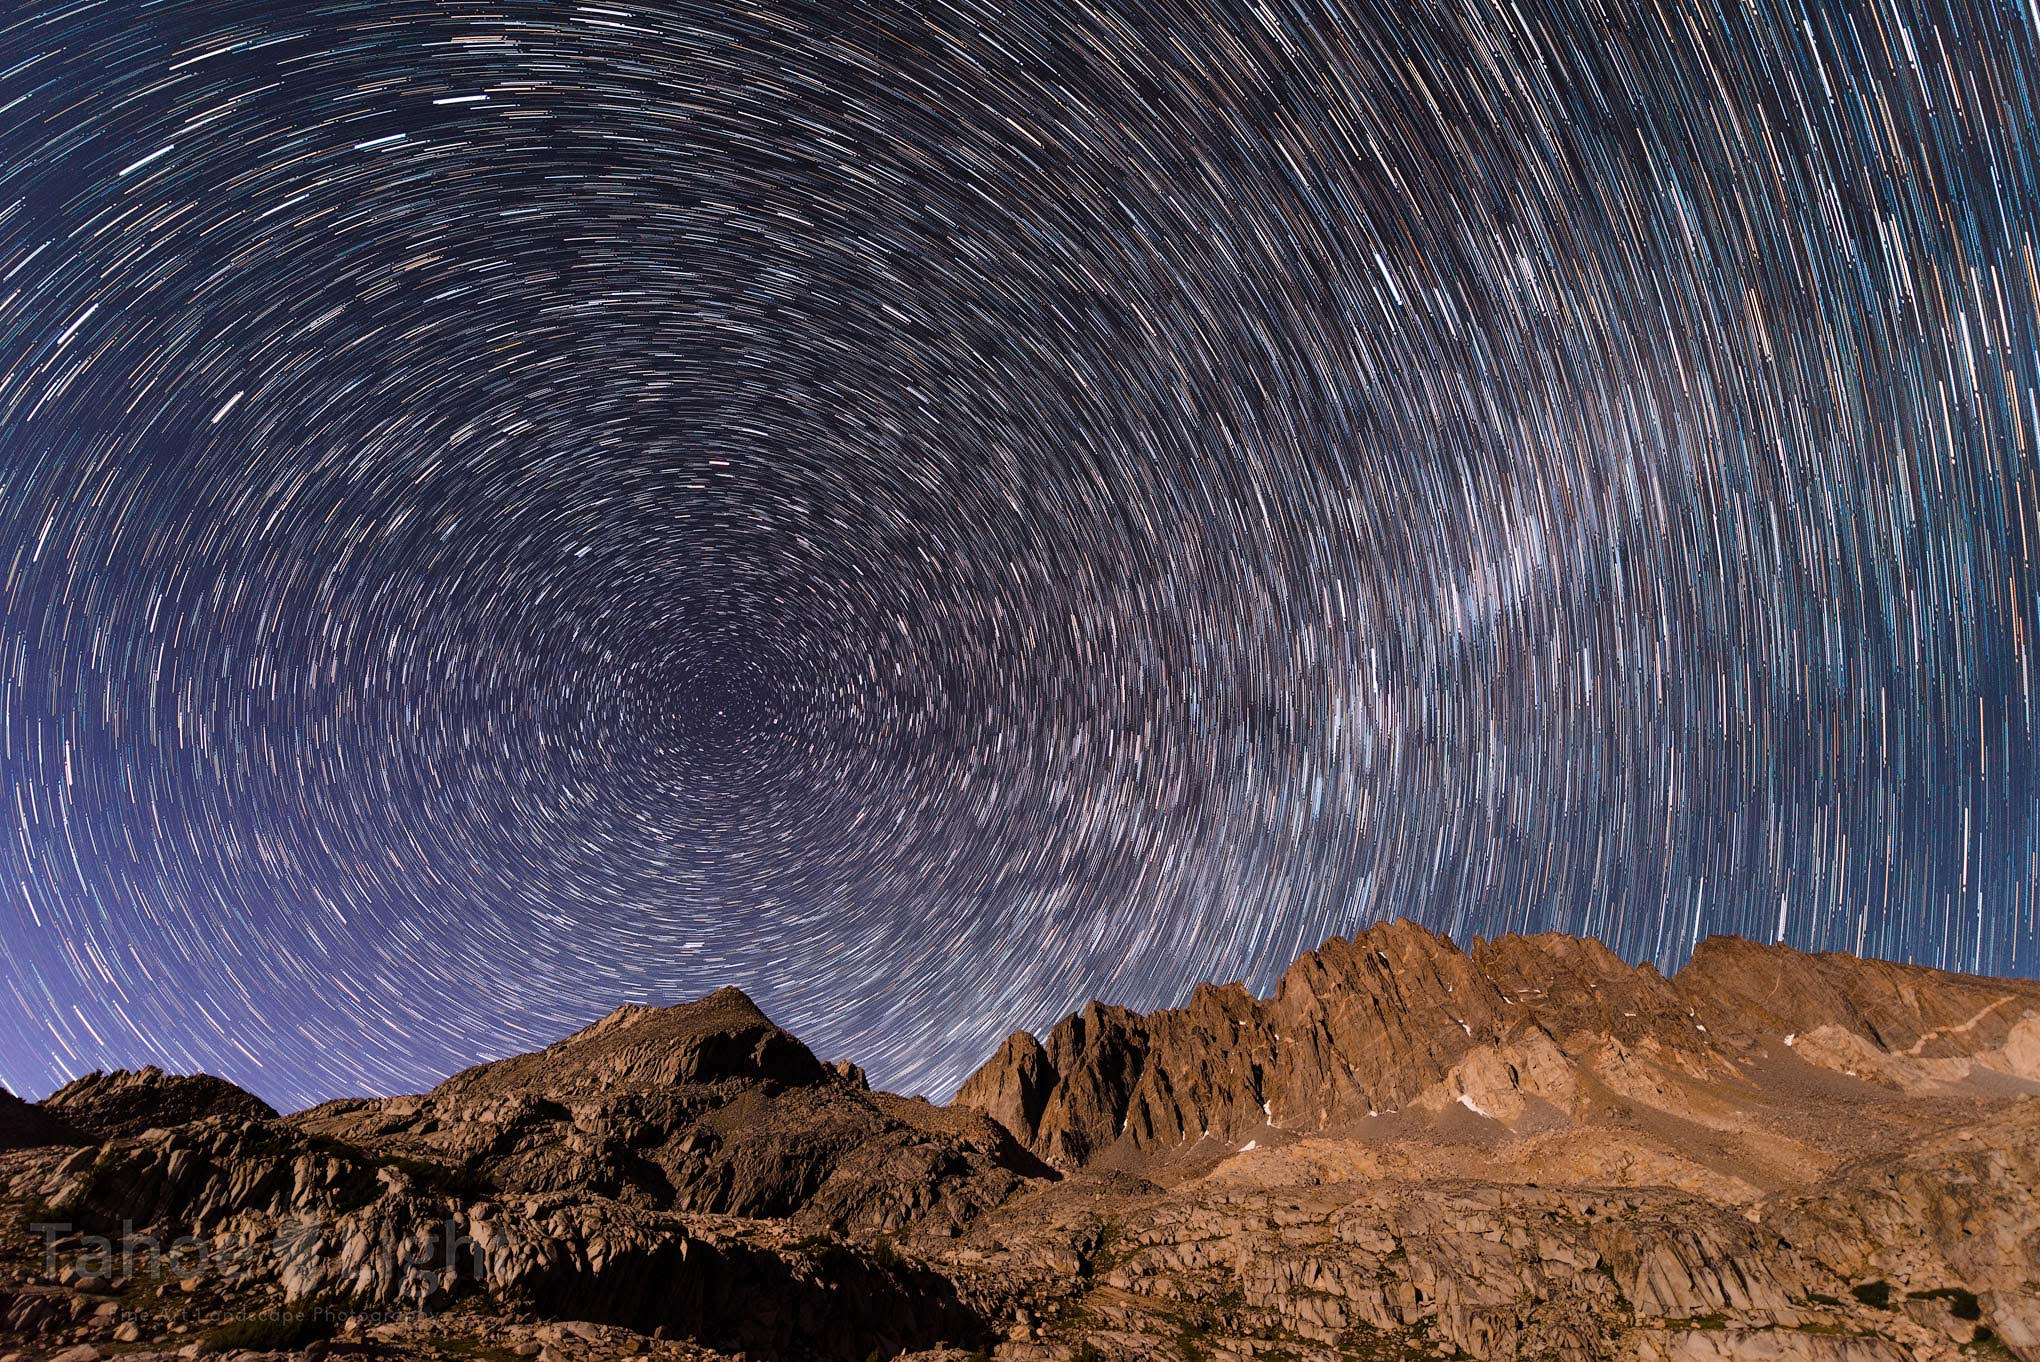 Star trails through the night sky over rocky Mount Whitney